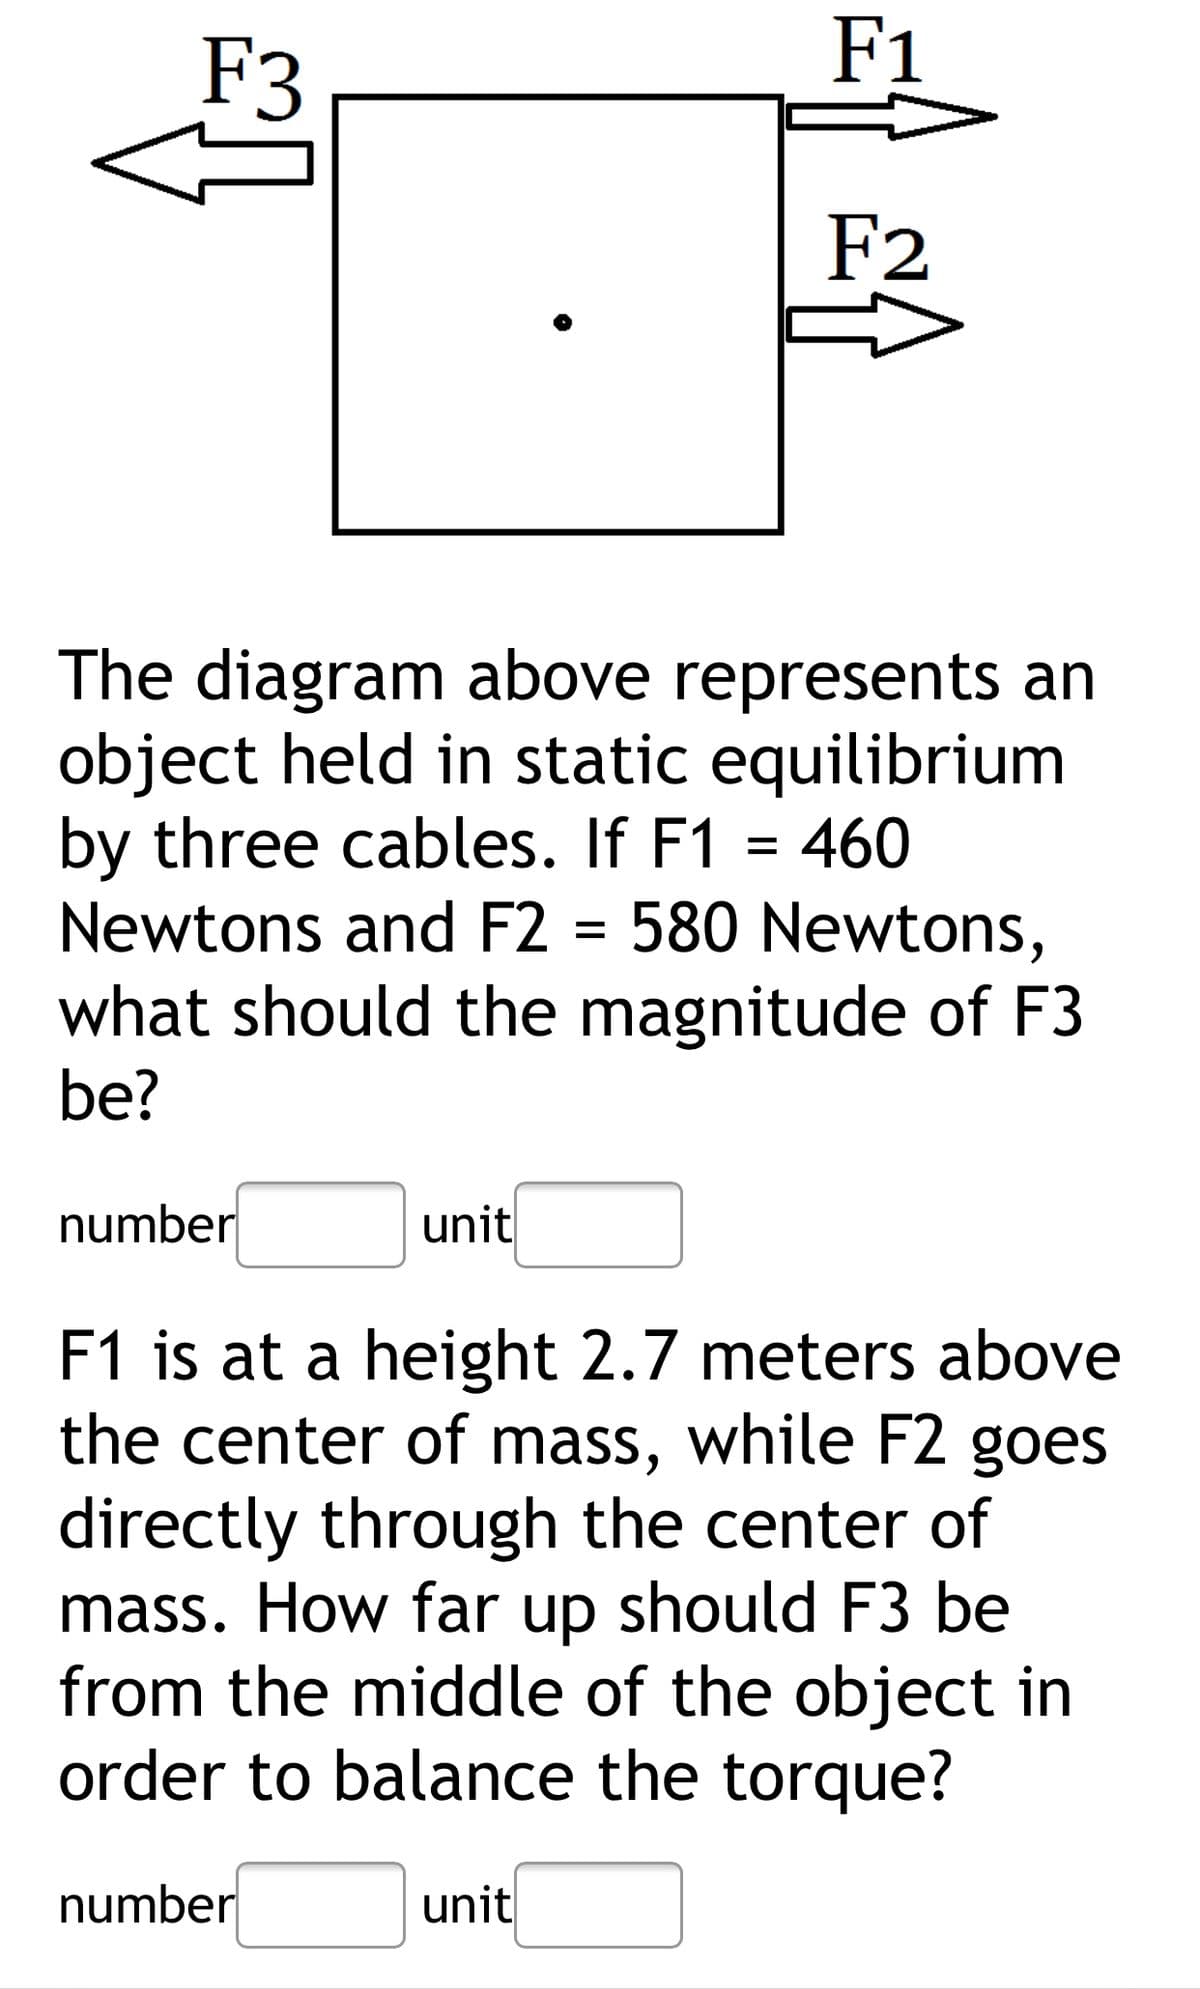 F3
F1
F2
The diagram above represents an
object held in static equilibrium
by three cables. If F1 = 460
Newtons and F2 = 580 Newtons,
what should the magnitude of F3
be?
number
unit
F1 is at a height 2.7 meters above
the center of mass, while F2 goes
directly through the center of
mass. How far up should F3 be
from the middle of the object in
order to balance the torque?
number
unit
